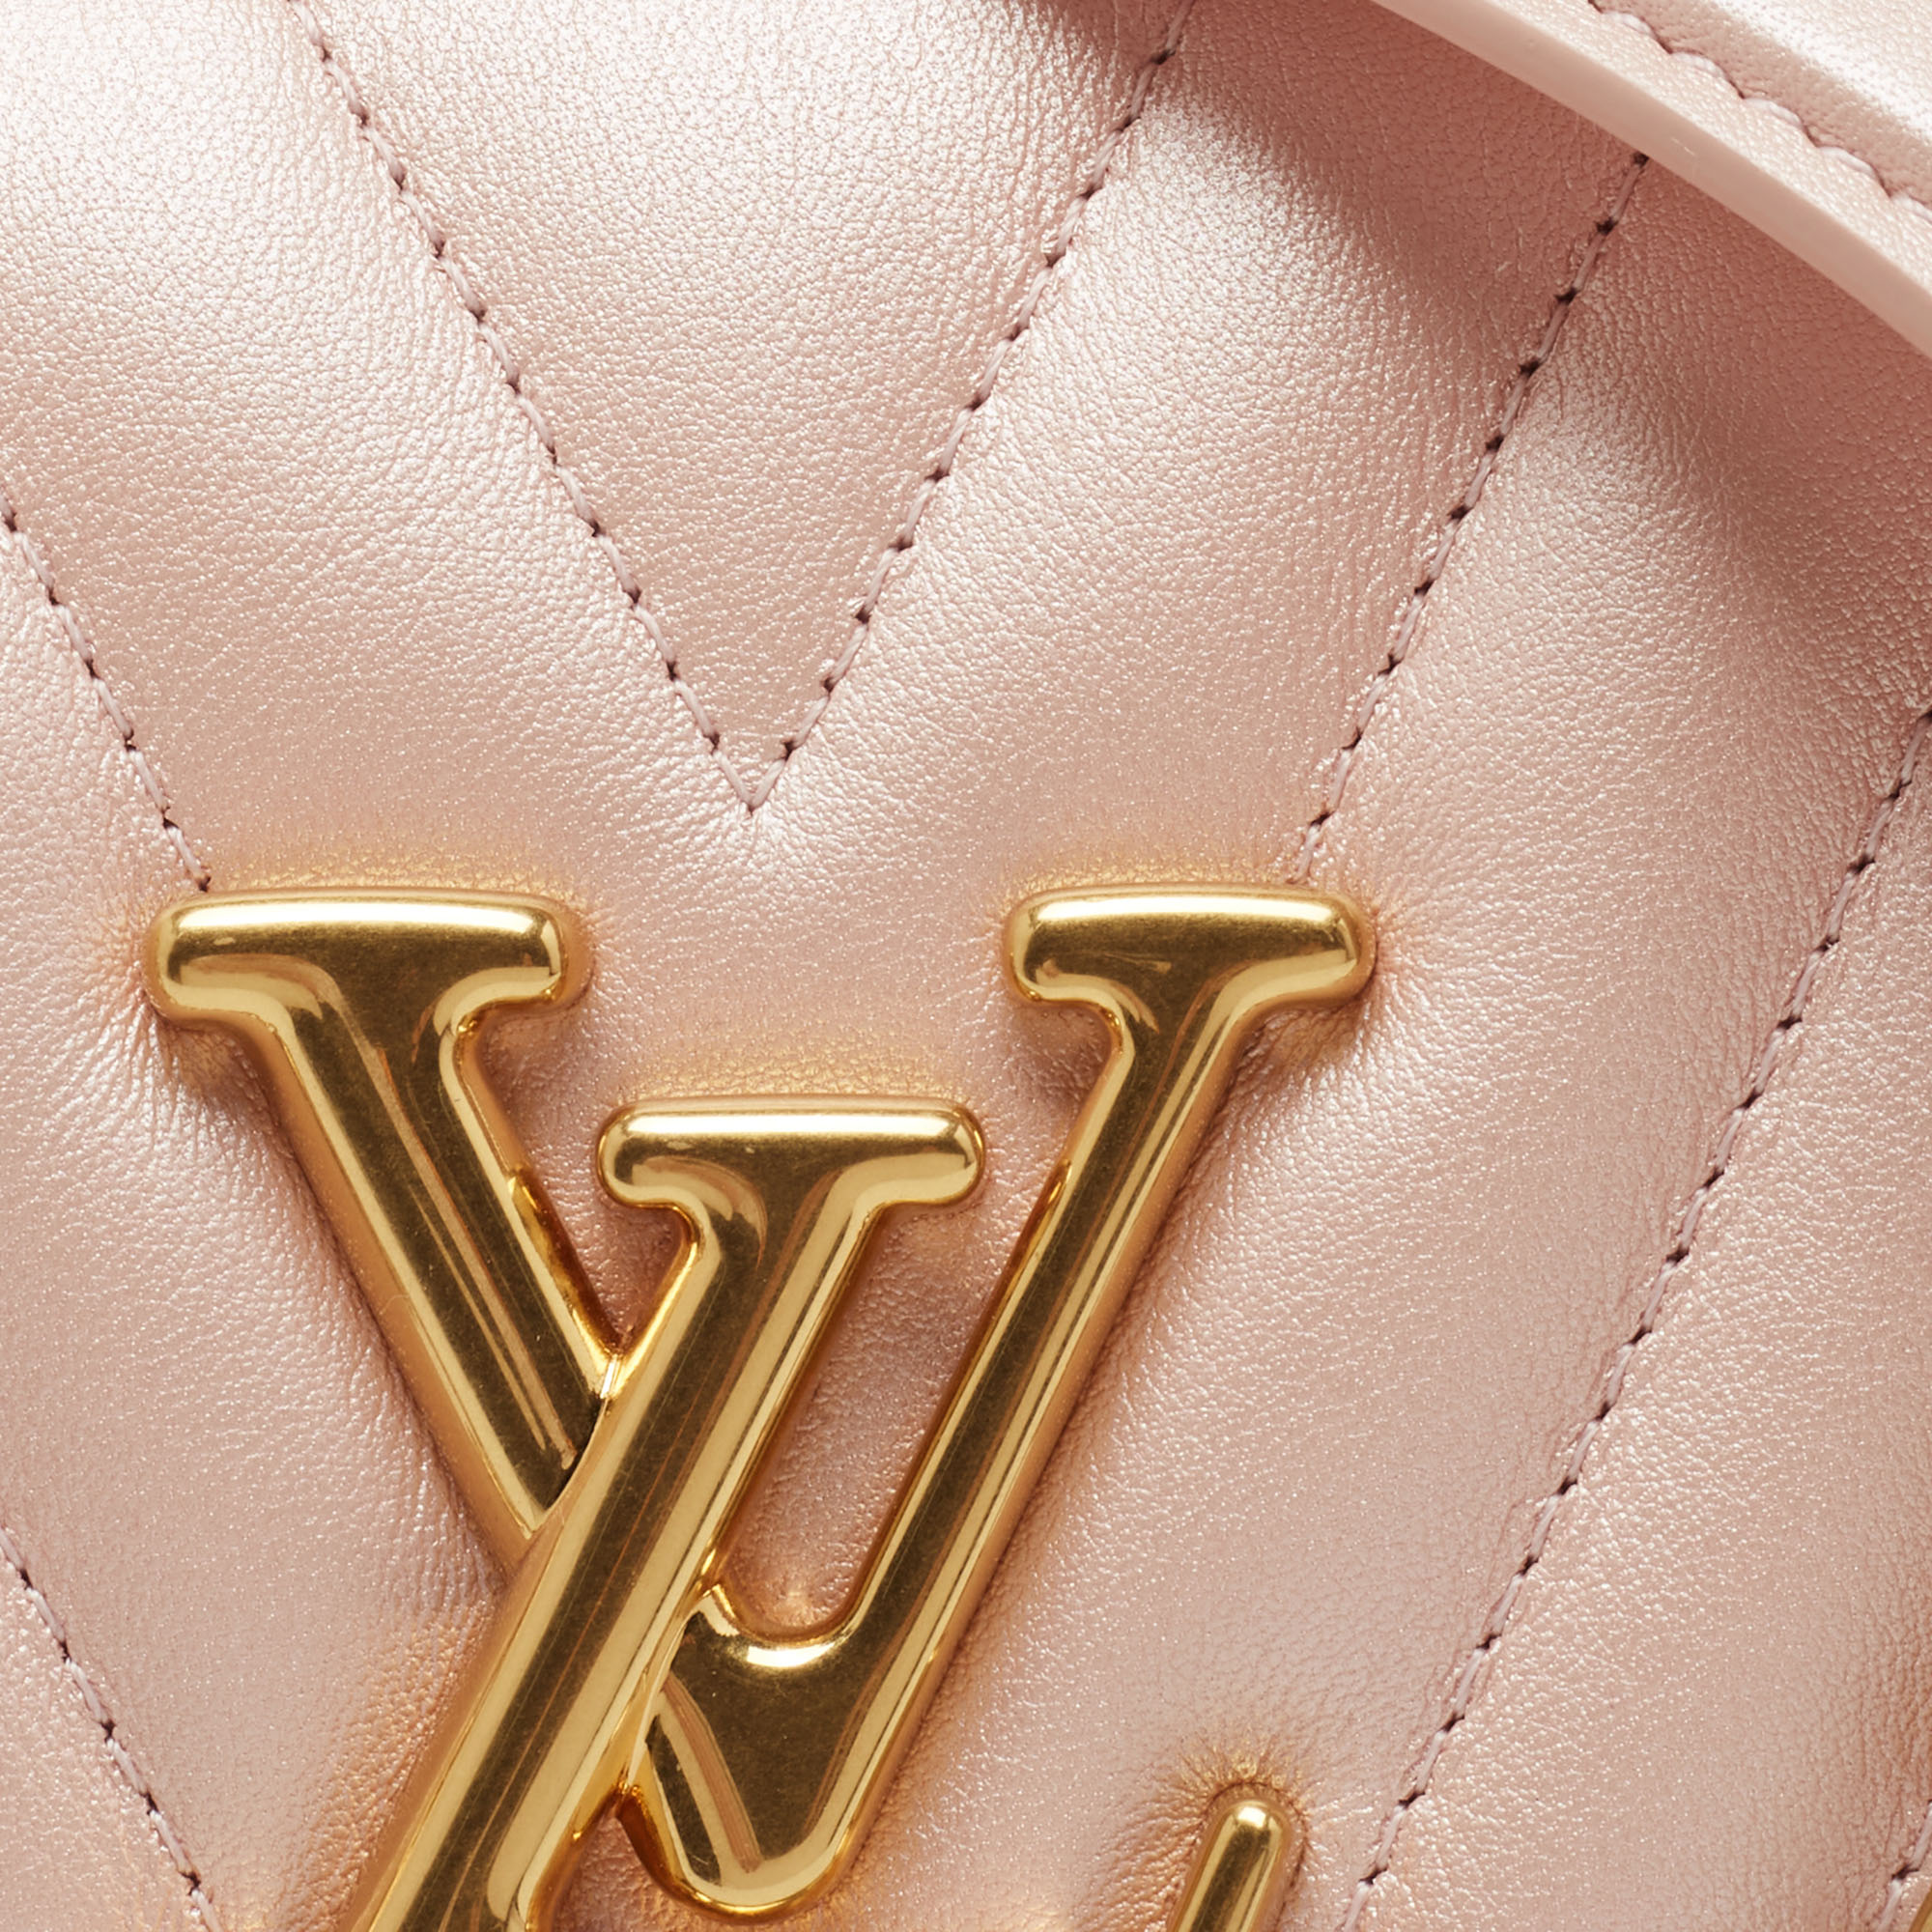 Louis Vuitton LV New Wave PM Chain bag Pink Leather ref.691230